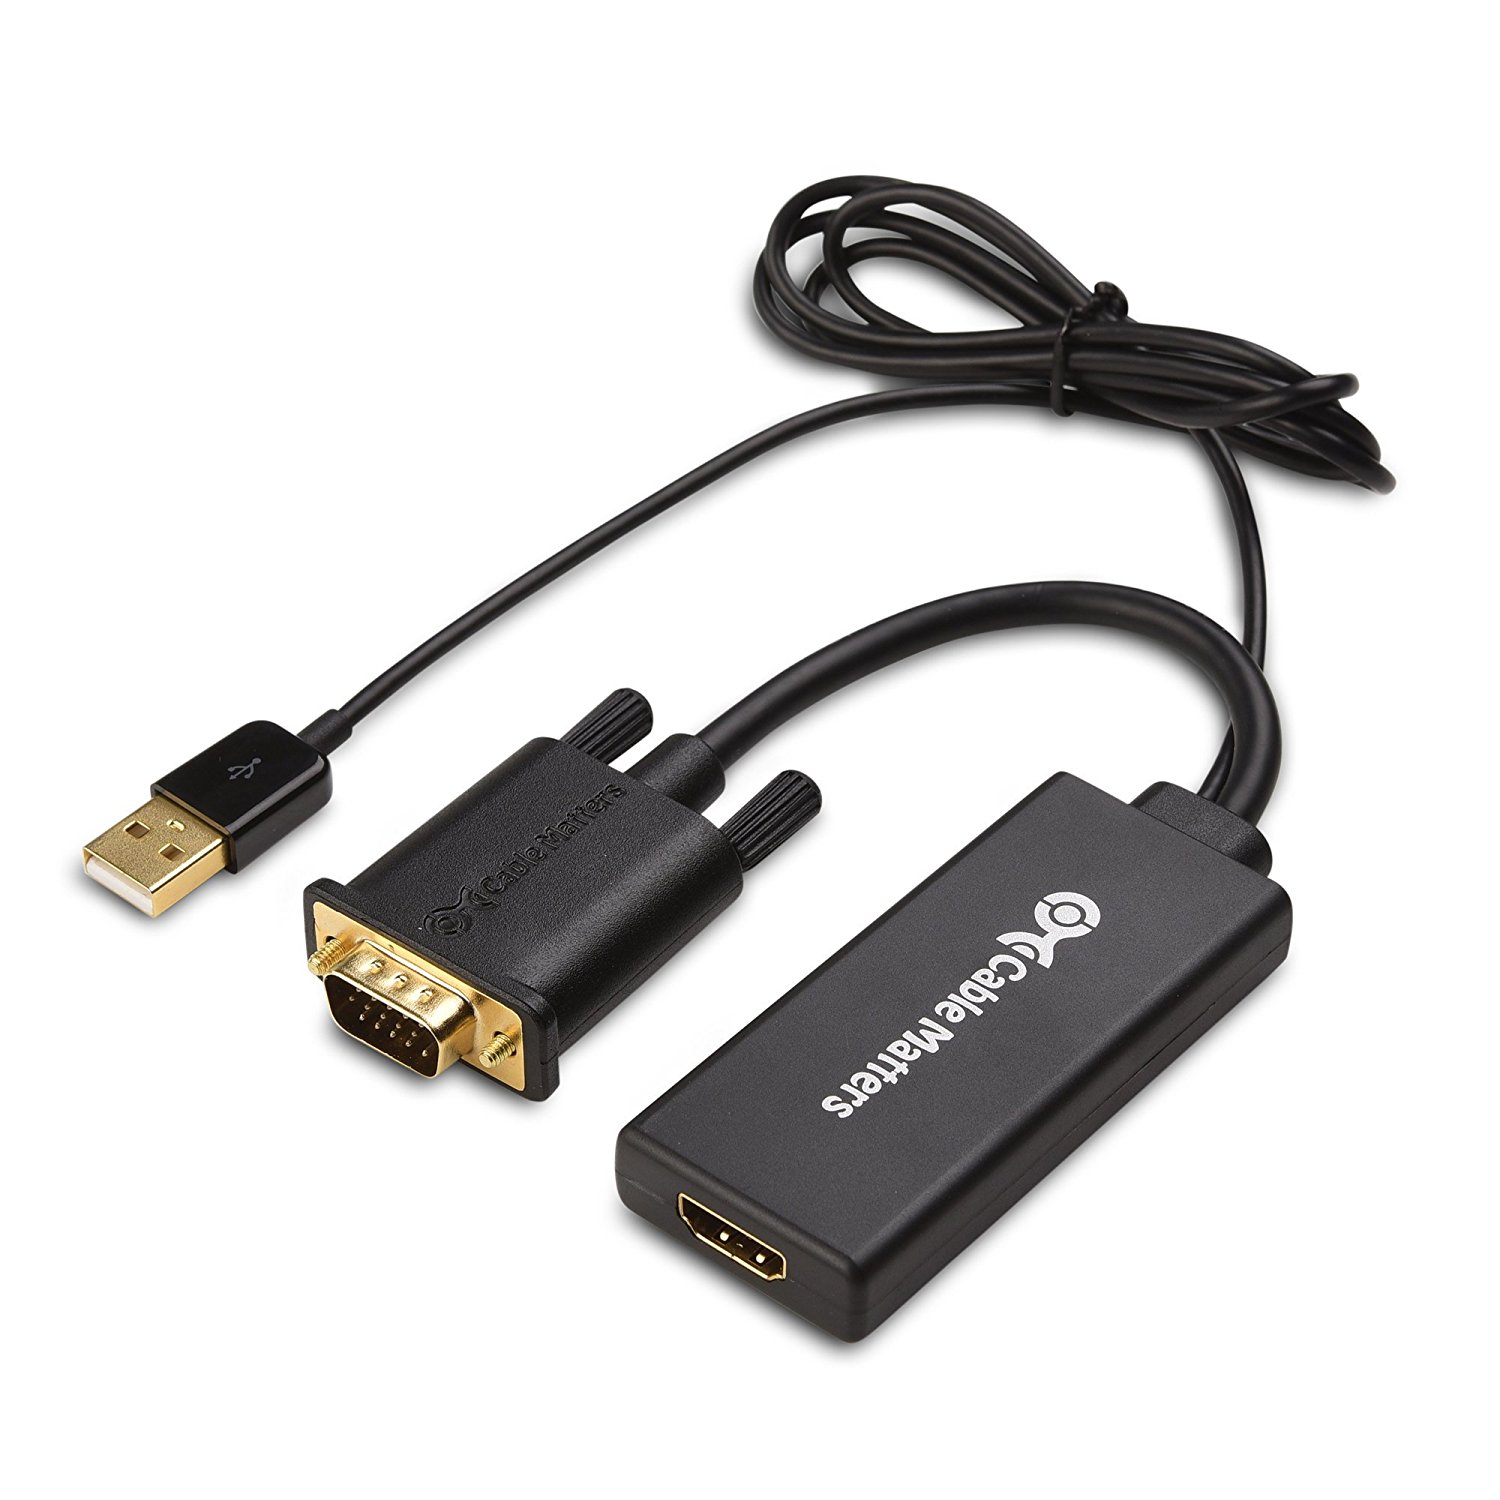 Cable Matters VGA to HDMI Converter (VGA to HDMI Adapter) with Audio Support - image 1 of 4